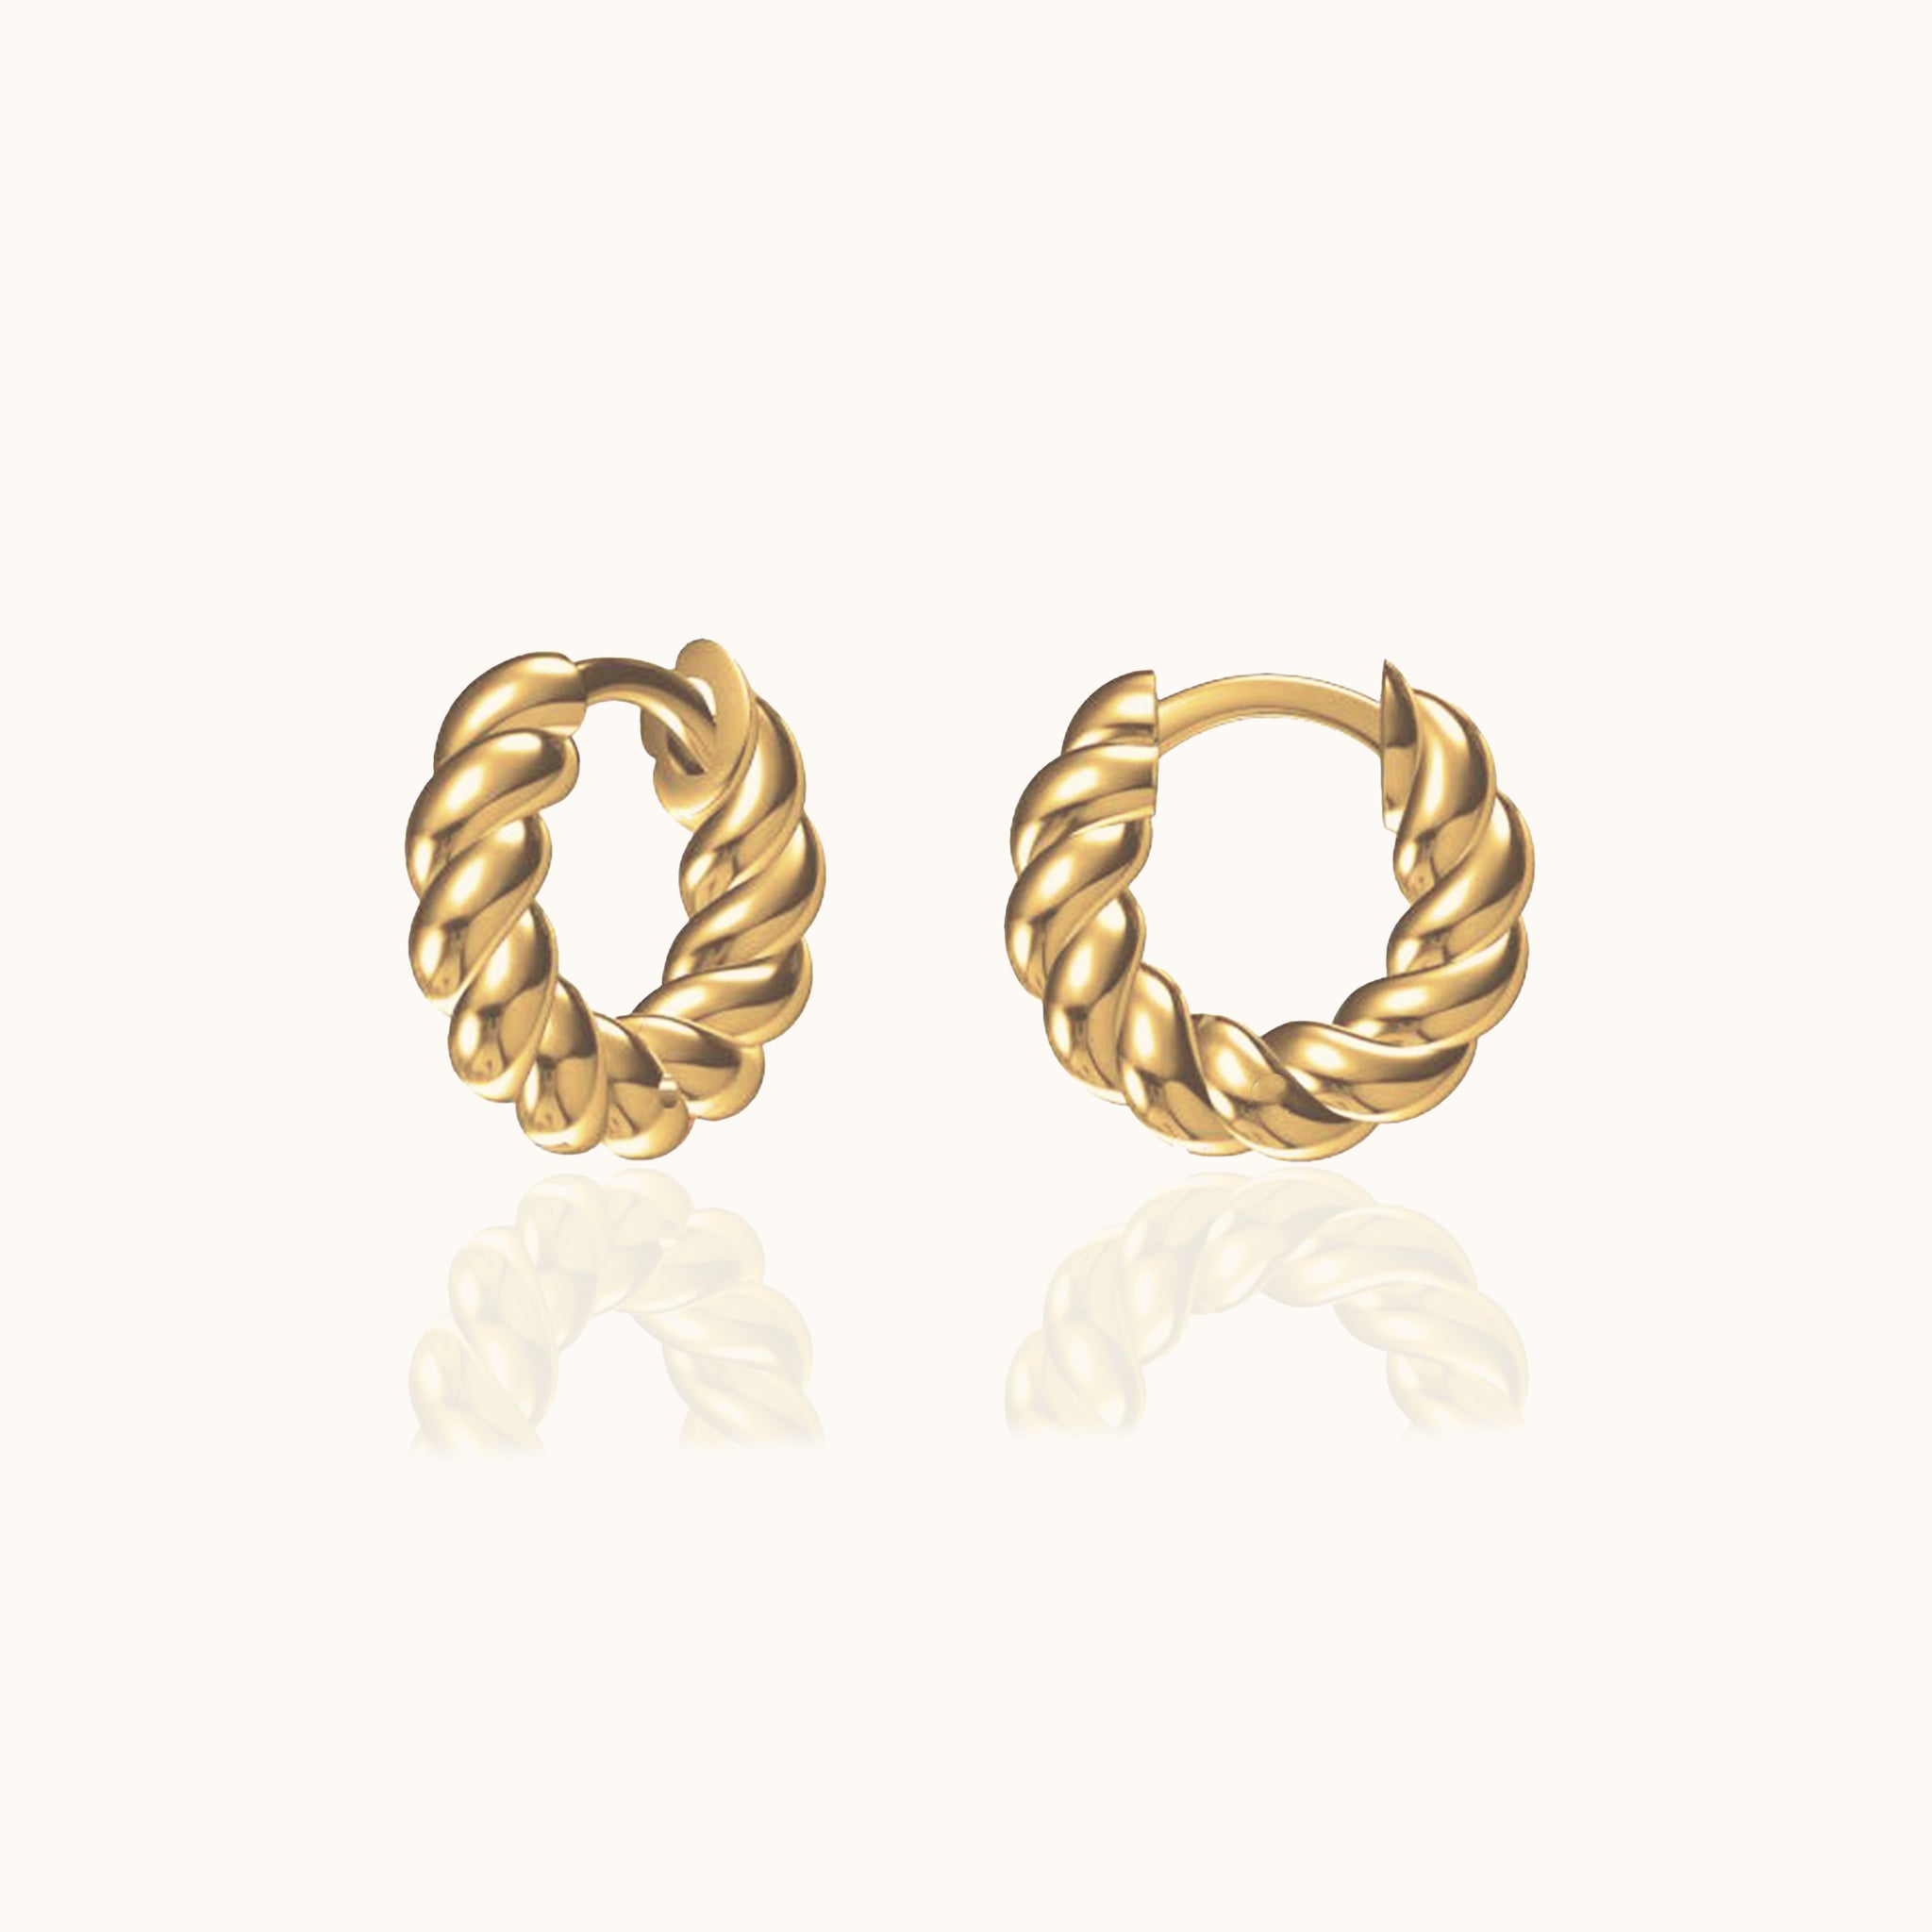 Braided Huggie Hoop Earrings 18K Gold Plated Crew Mini Twisted Rope Texture Swirl Round by Doviana